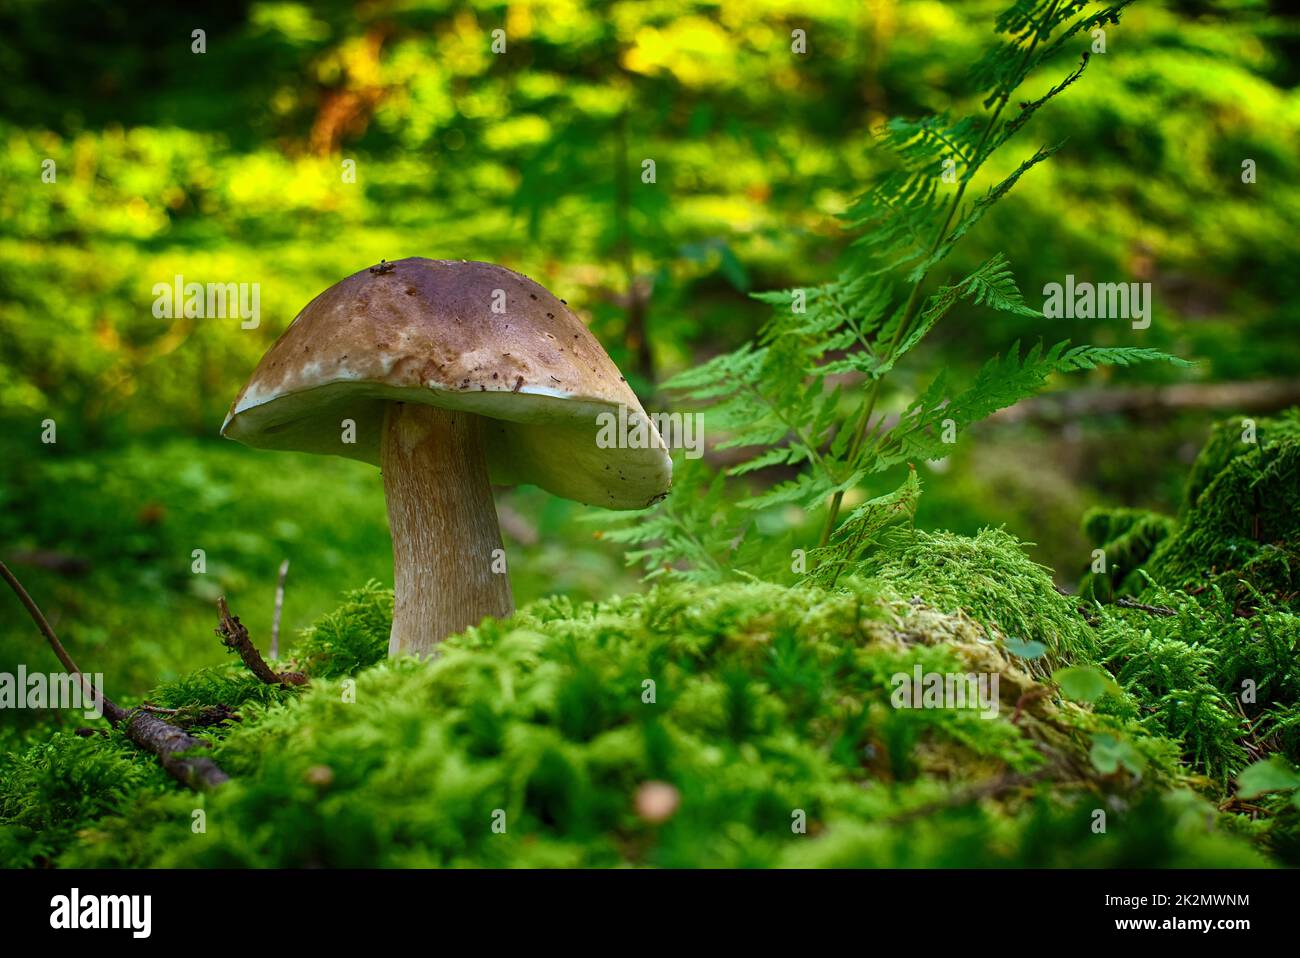 Cep or Boletus Mushroom growing in a forest Stock Photo